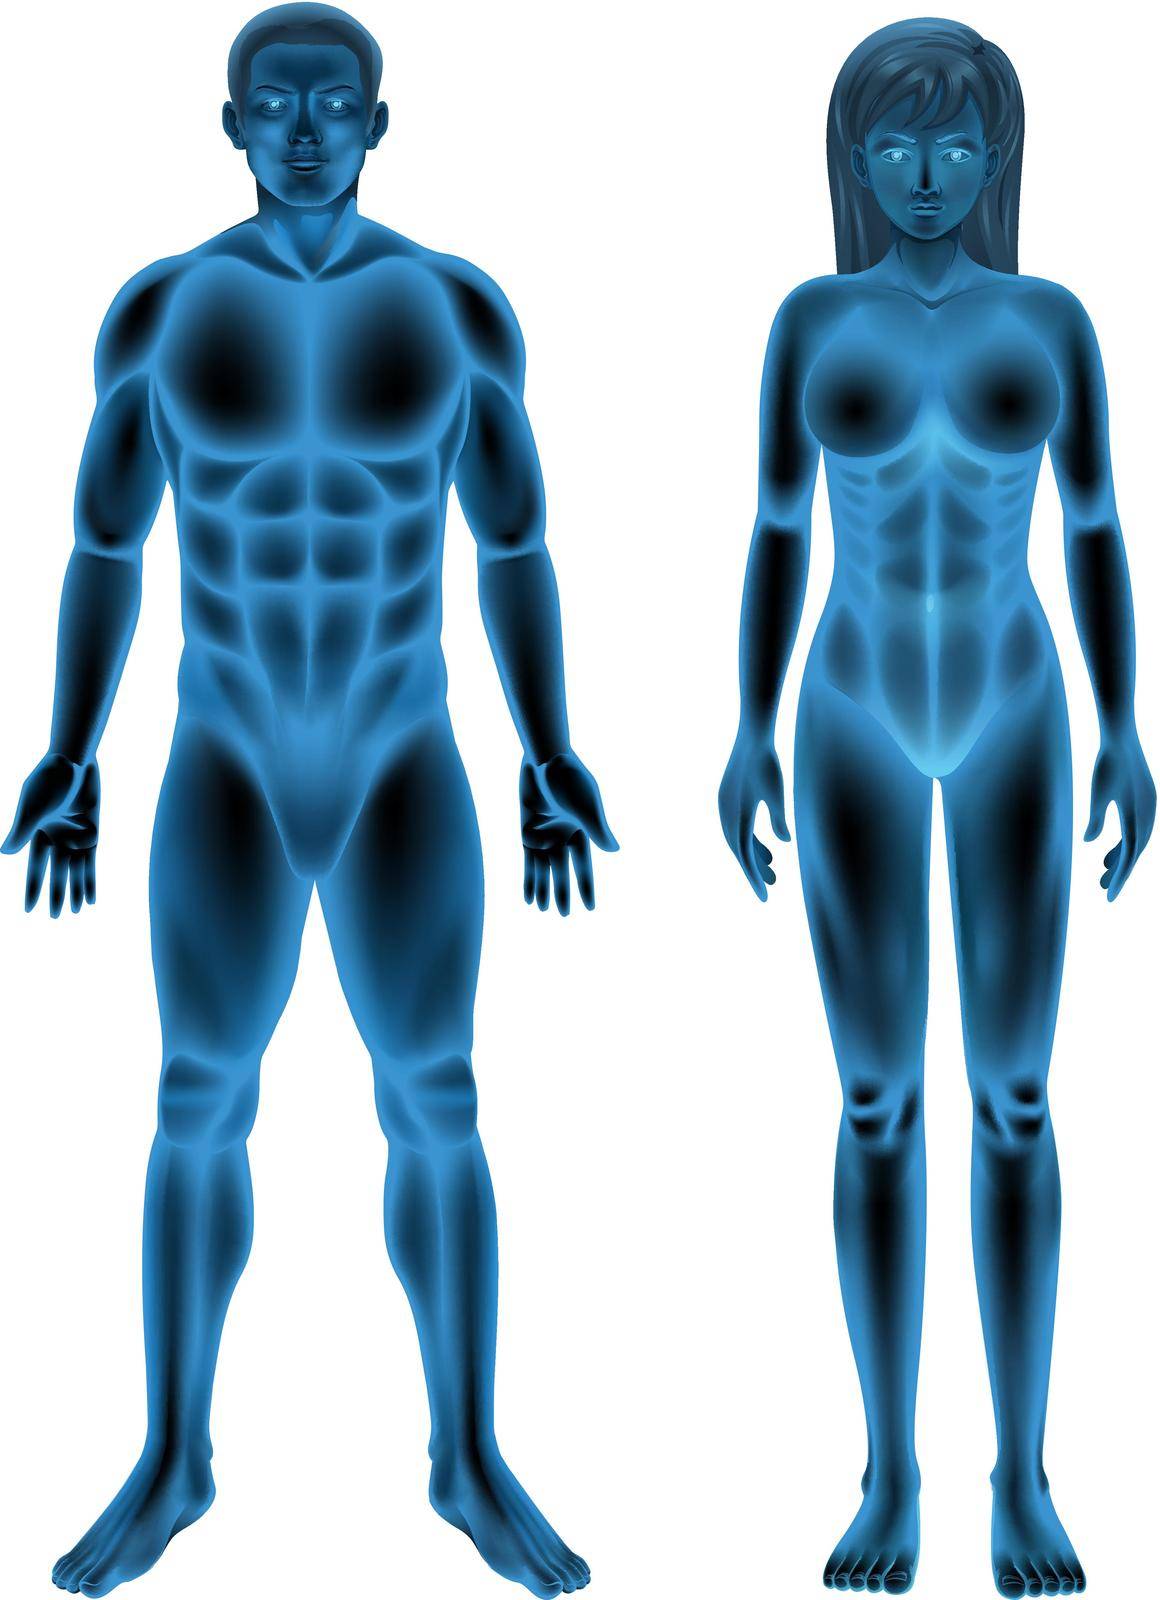 Male and female human body by iimages